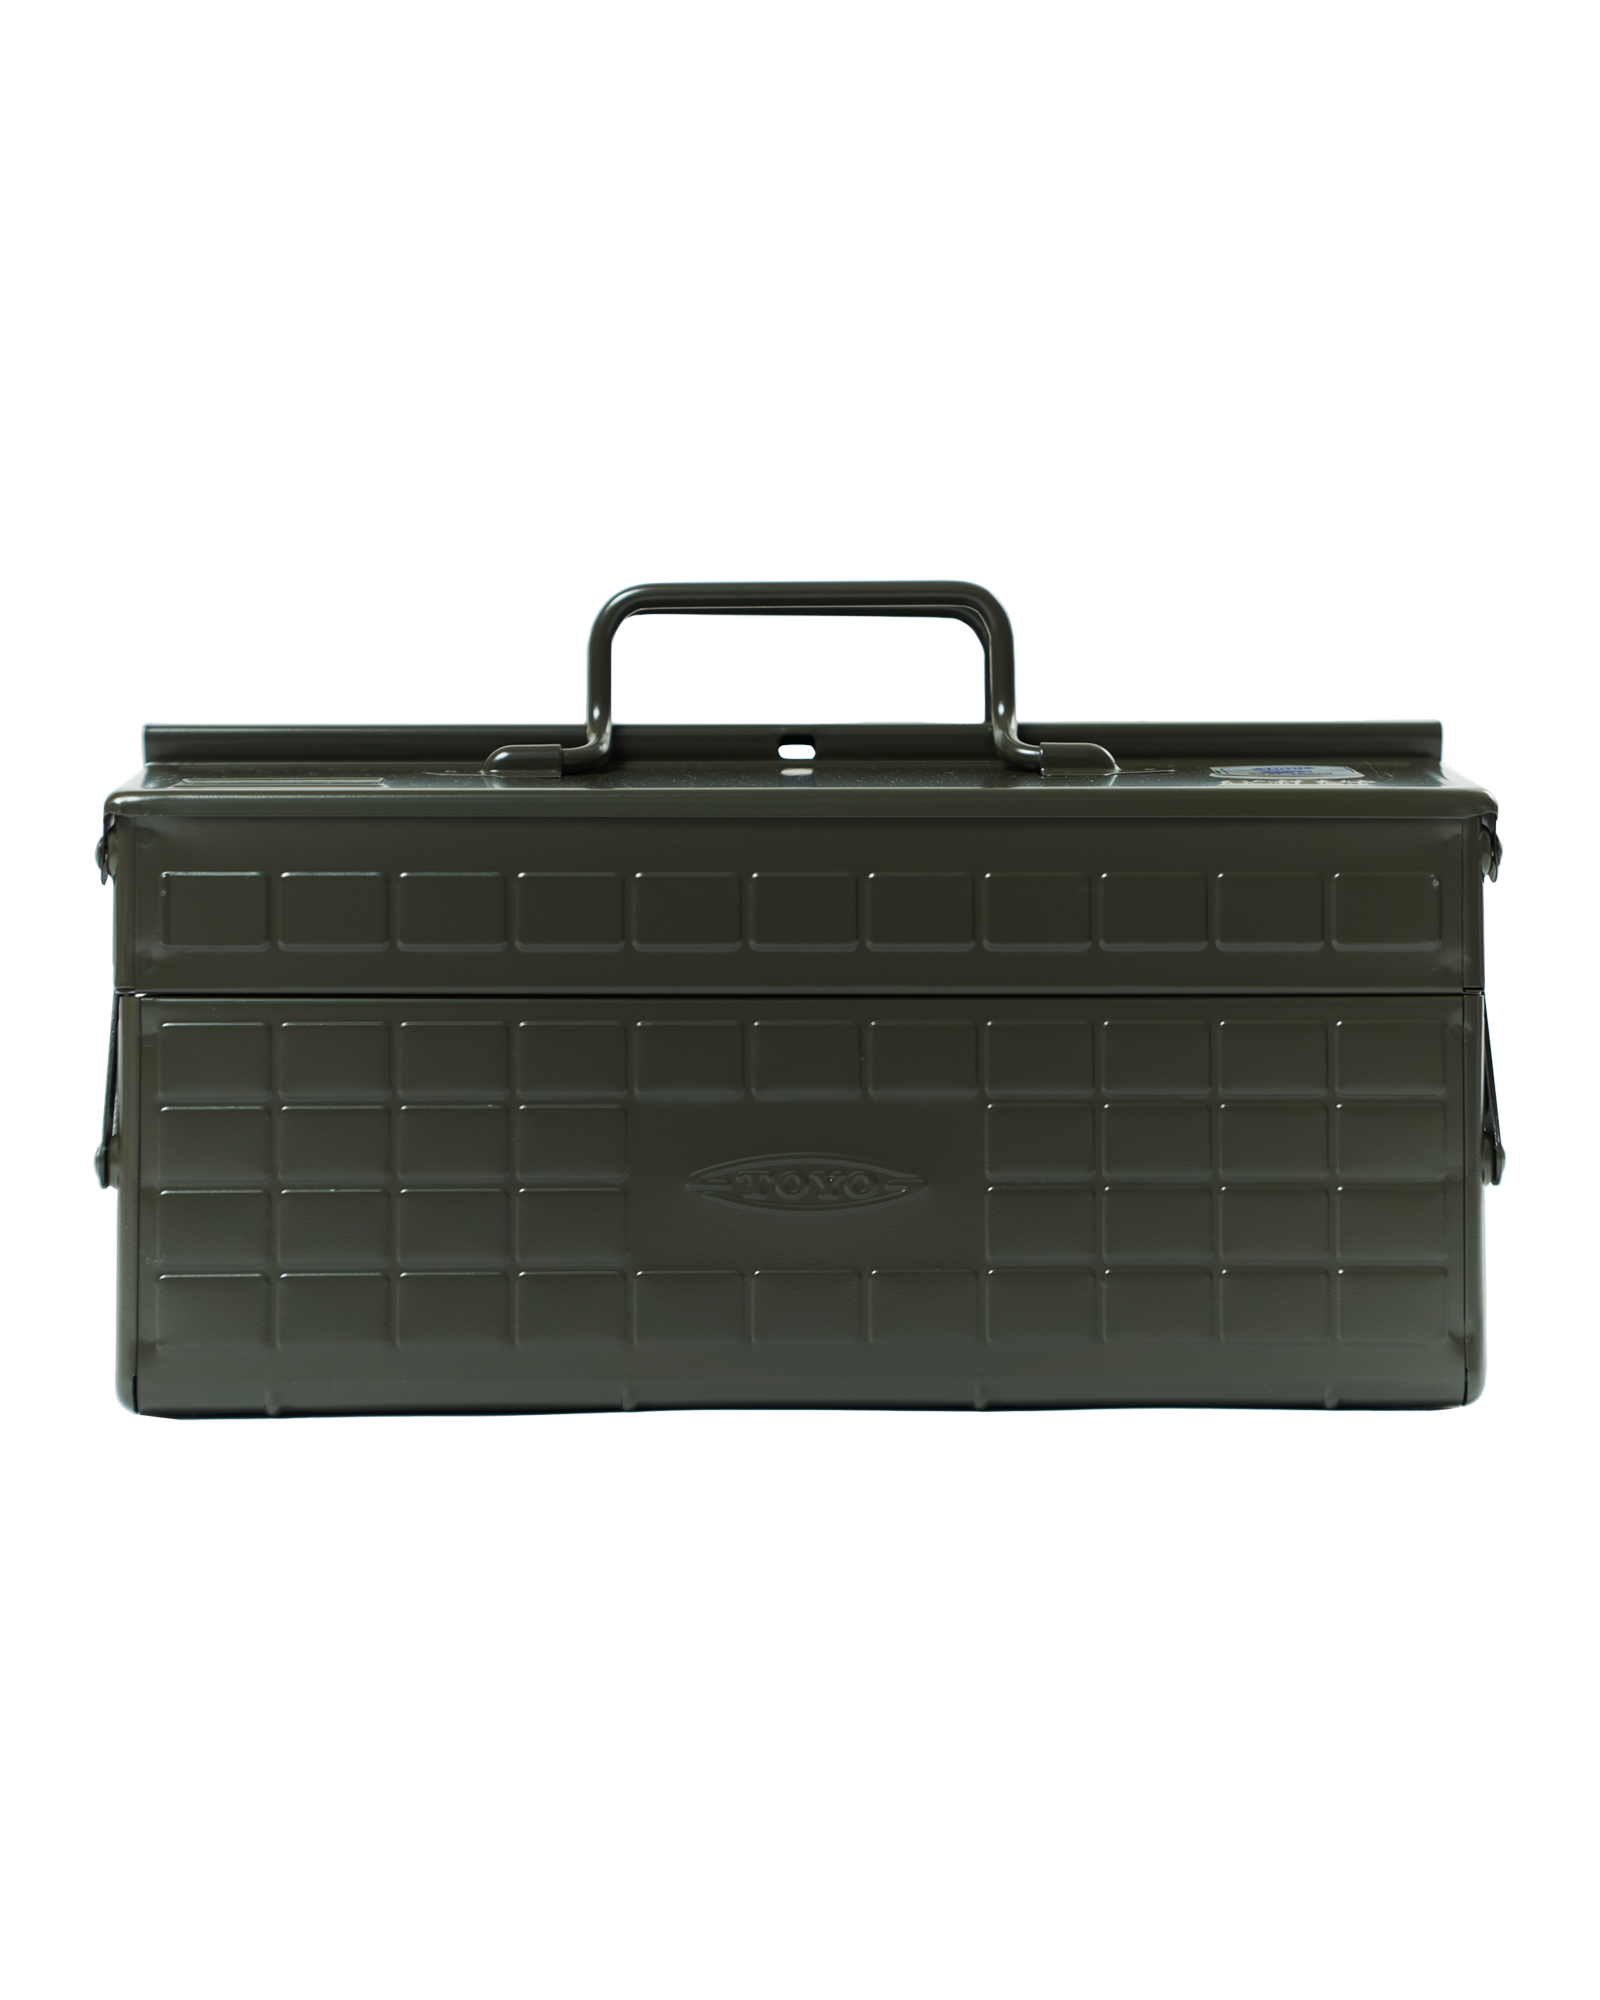 TOYO Cantilever Toolbox ST-350 (Military Green)